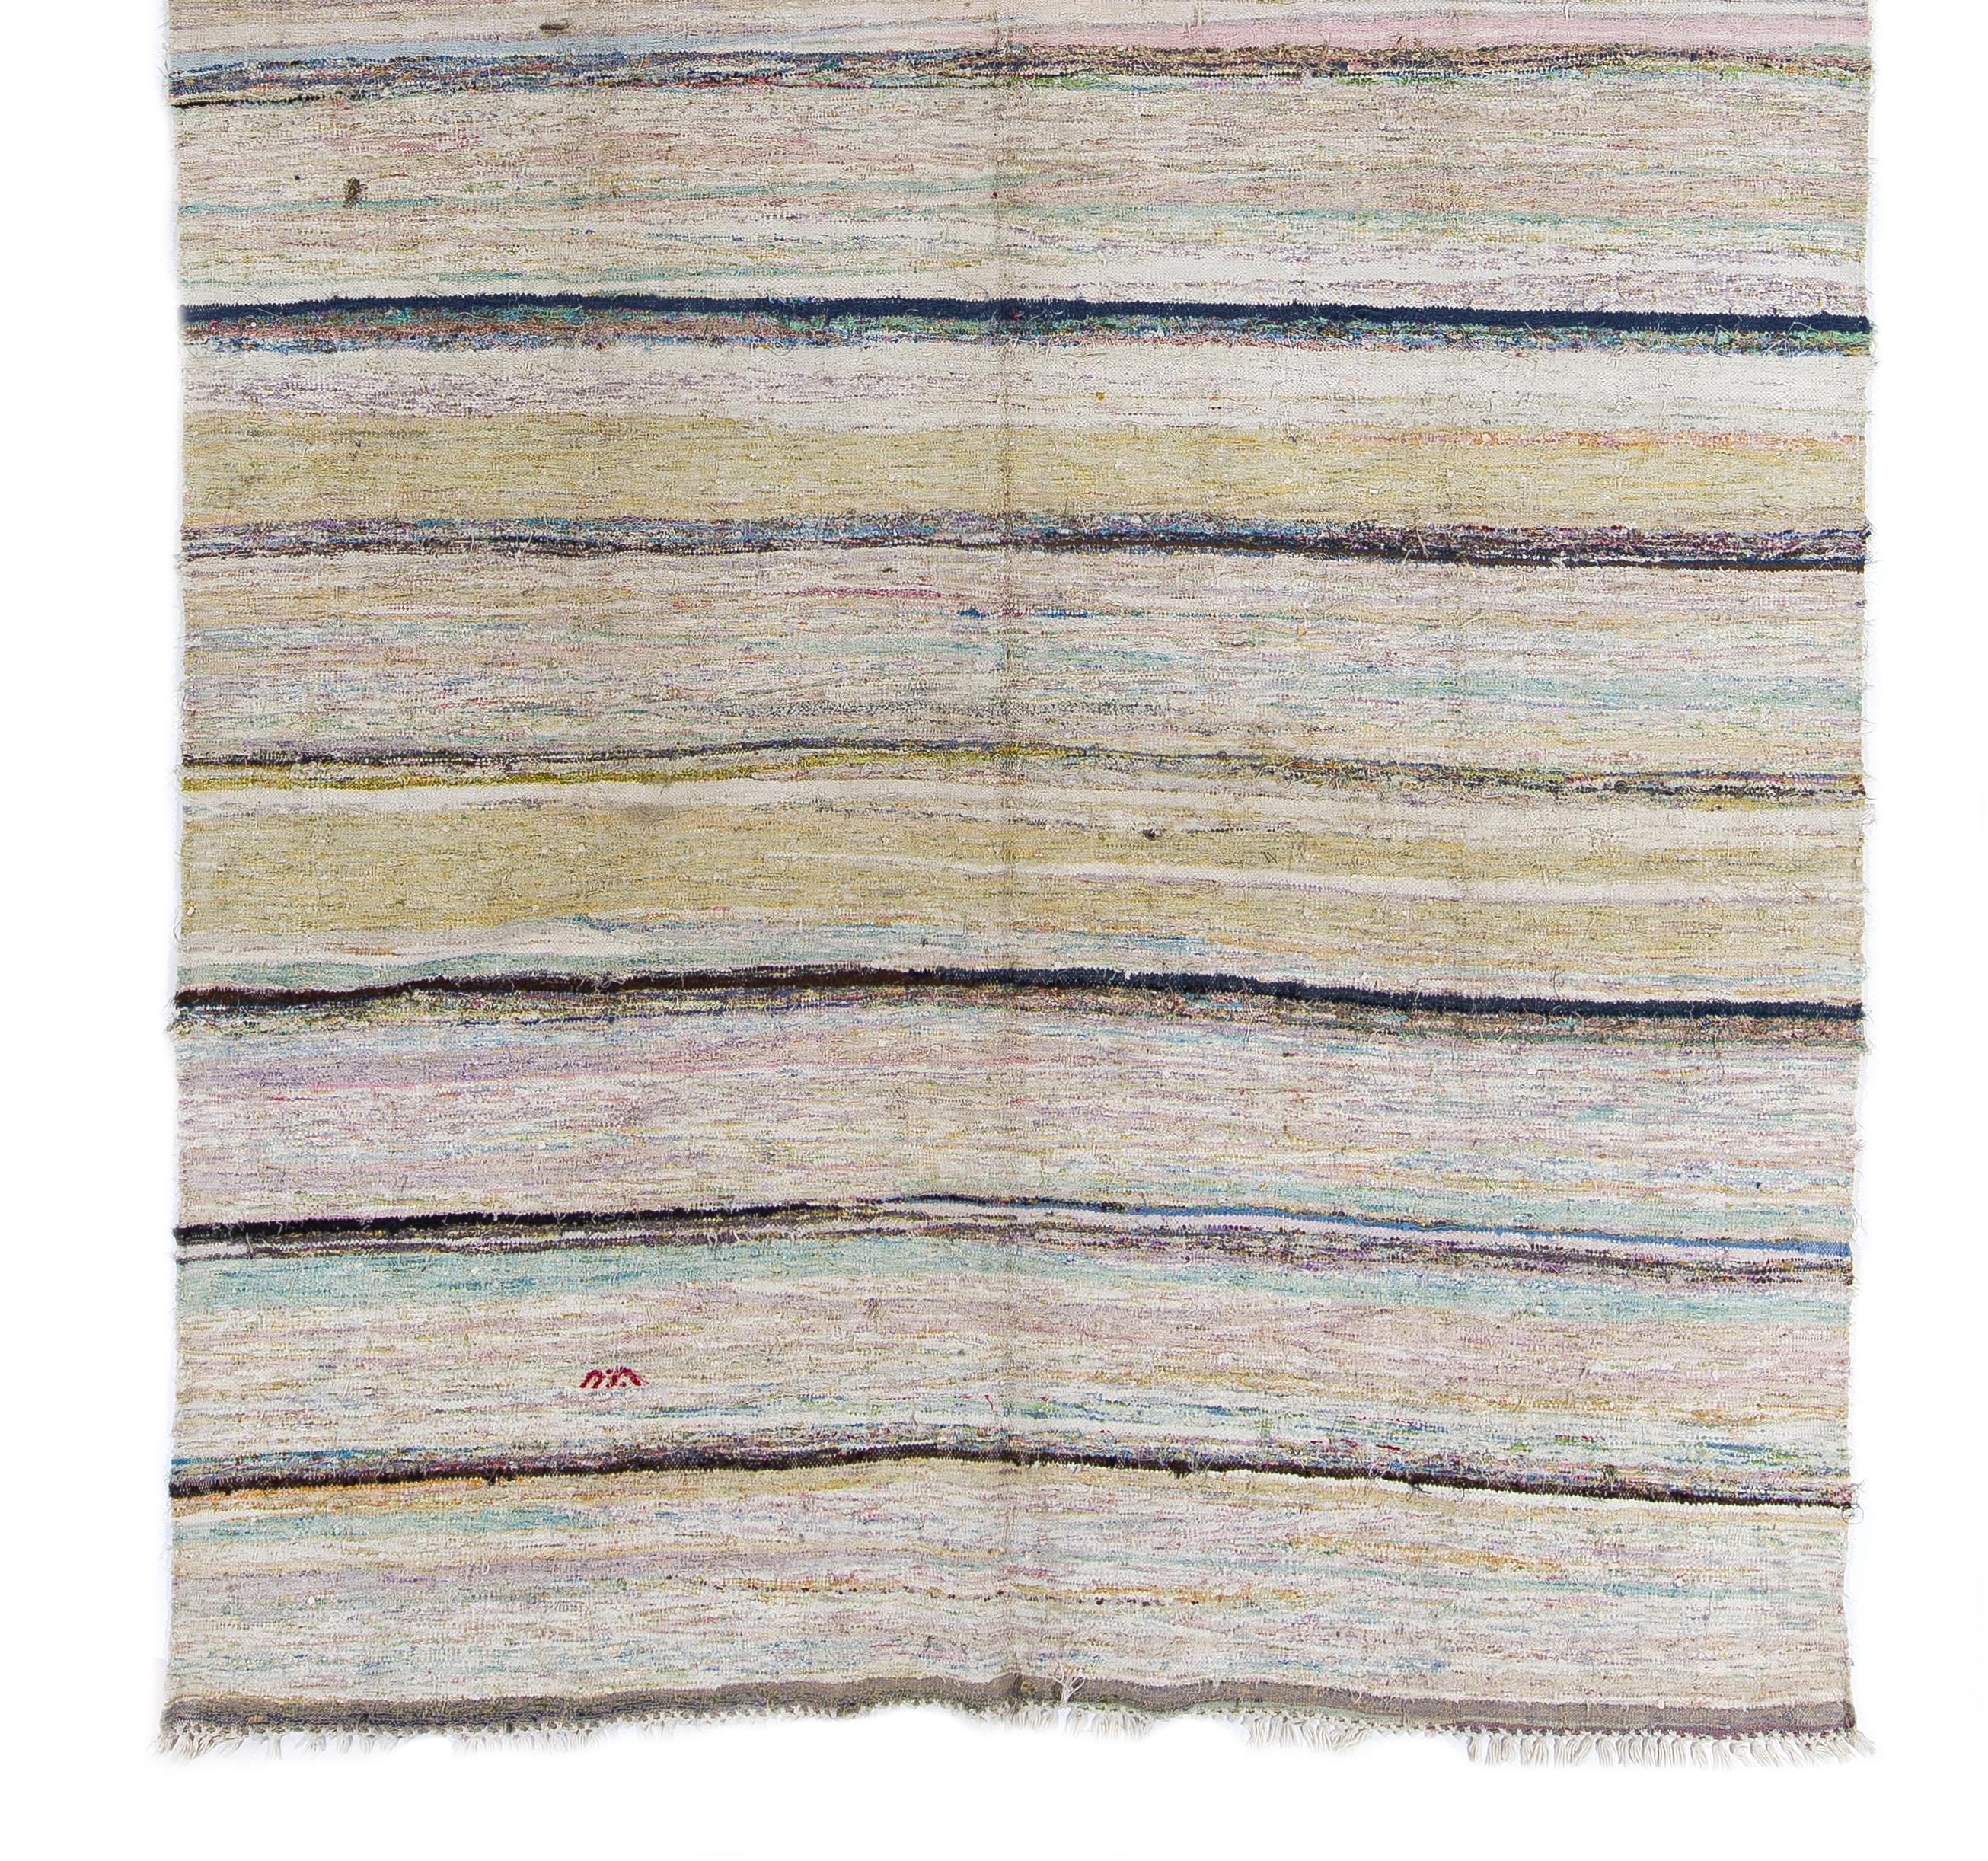 6.5x12.8 Ft Cotton Hand-Woven Striped Kilim Rug in Pastel Colors, Reversible In Good Condition For Sale In Philadelphia, PA